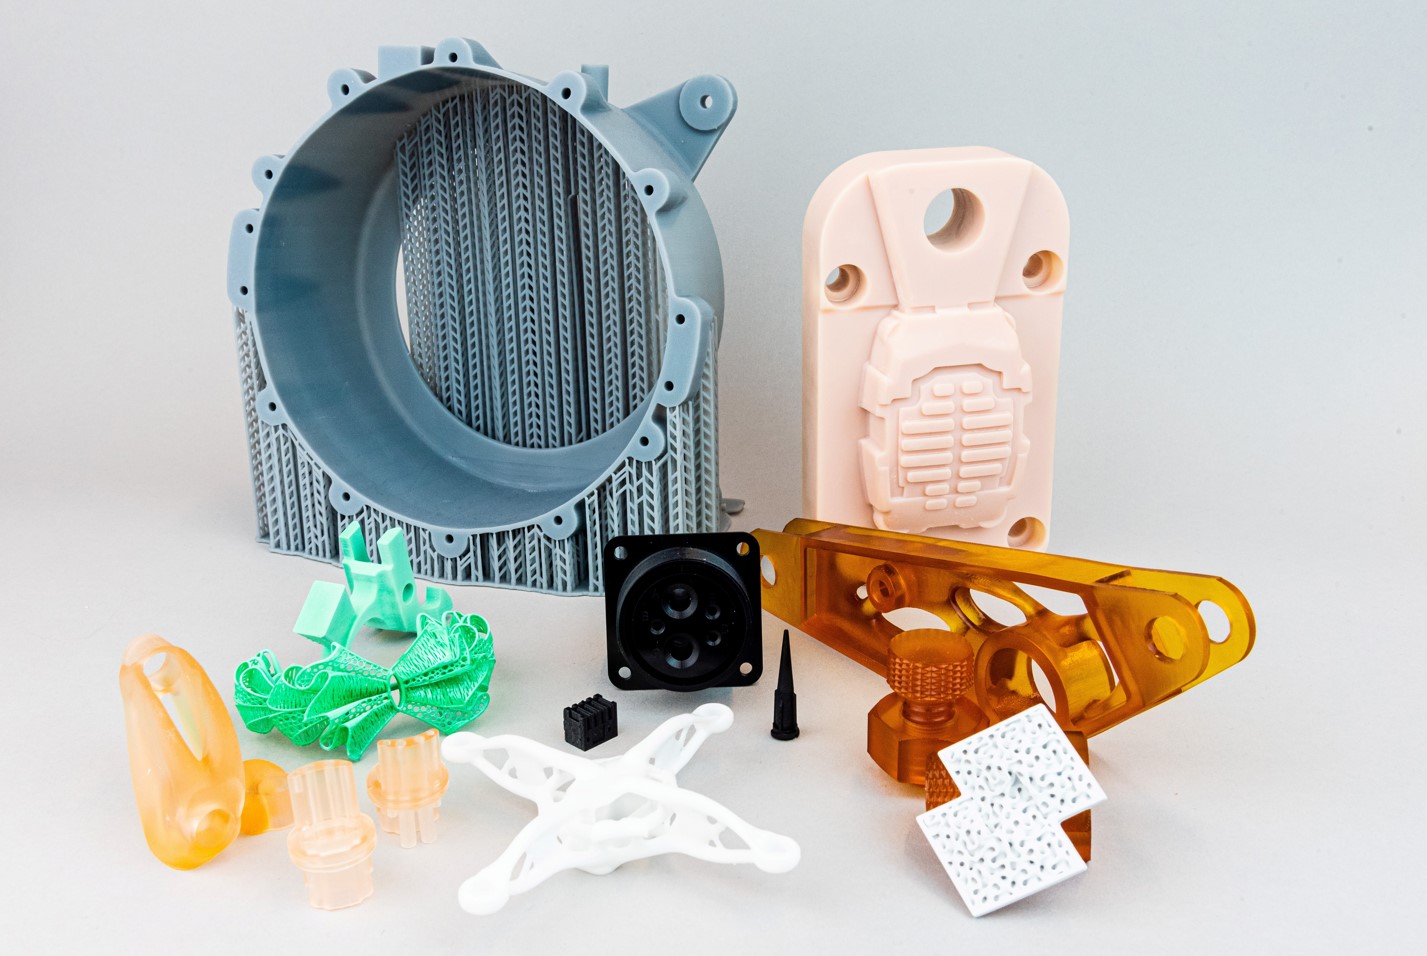 Stratasys latest developments: two 3D printers, Grabcad Software For Origin 3D Printers as well as 16 new materials across three AM technologies - 3D ADEPT MEDIA